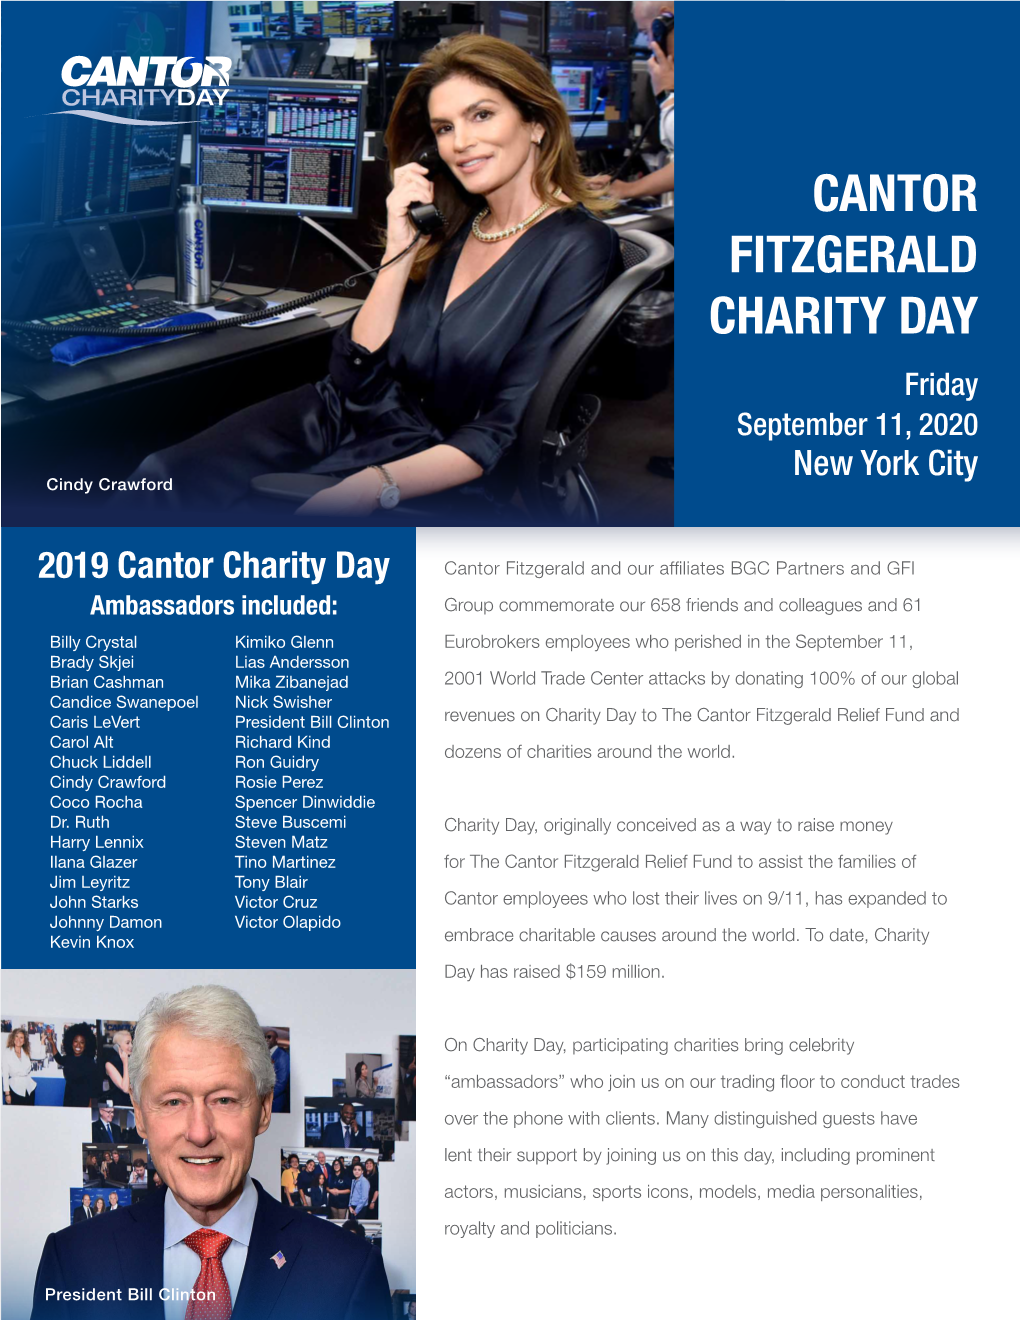 CANTOR FITZGERALD CHARITY DAY Friday September 11, 2020 New York City Cindy Crawford